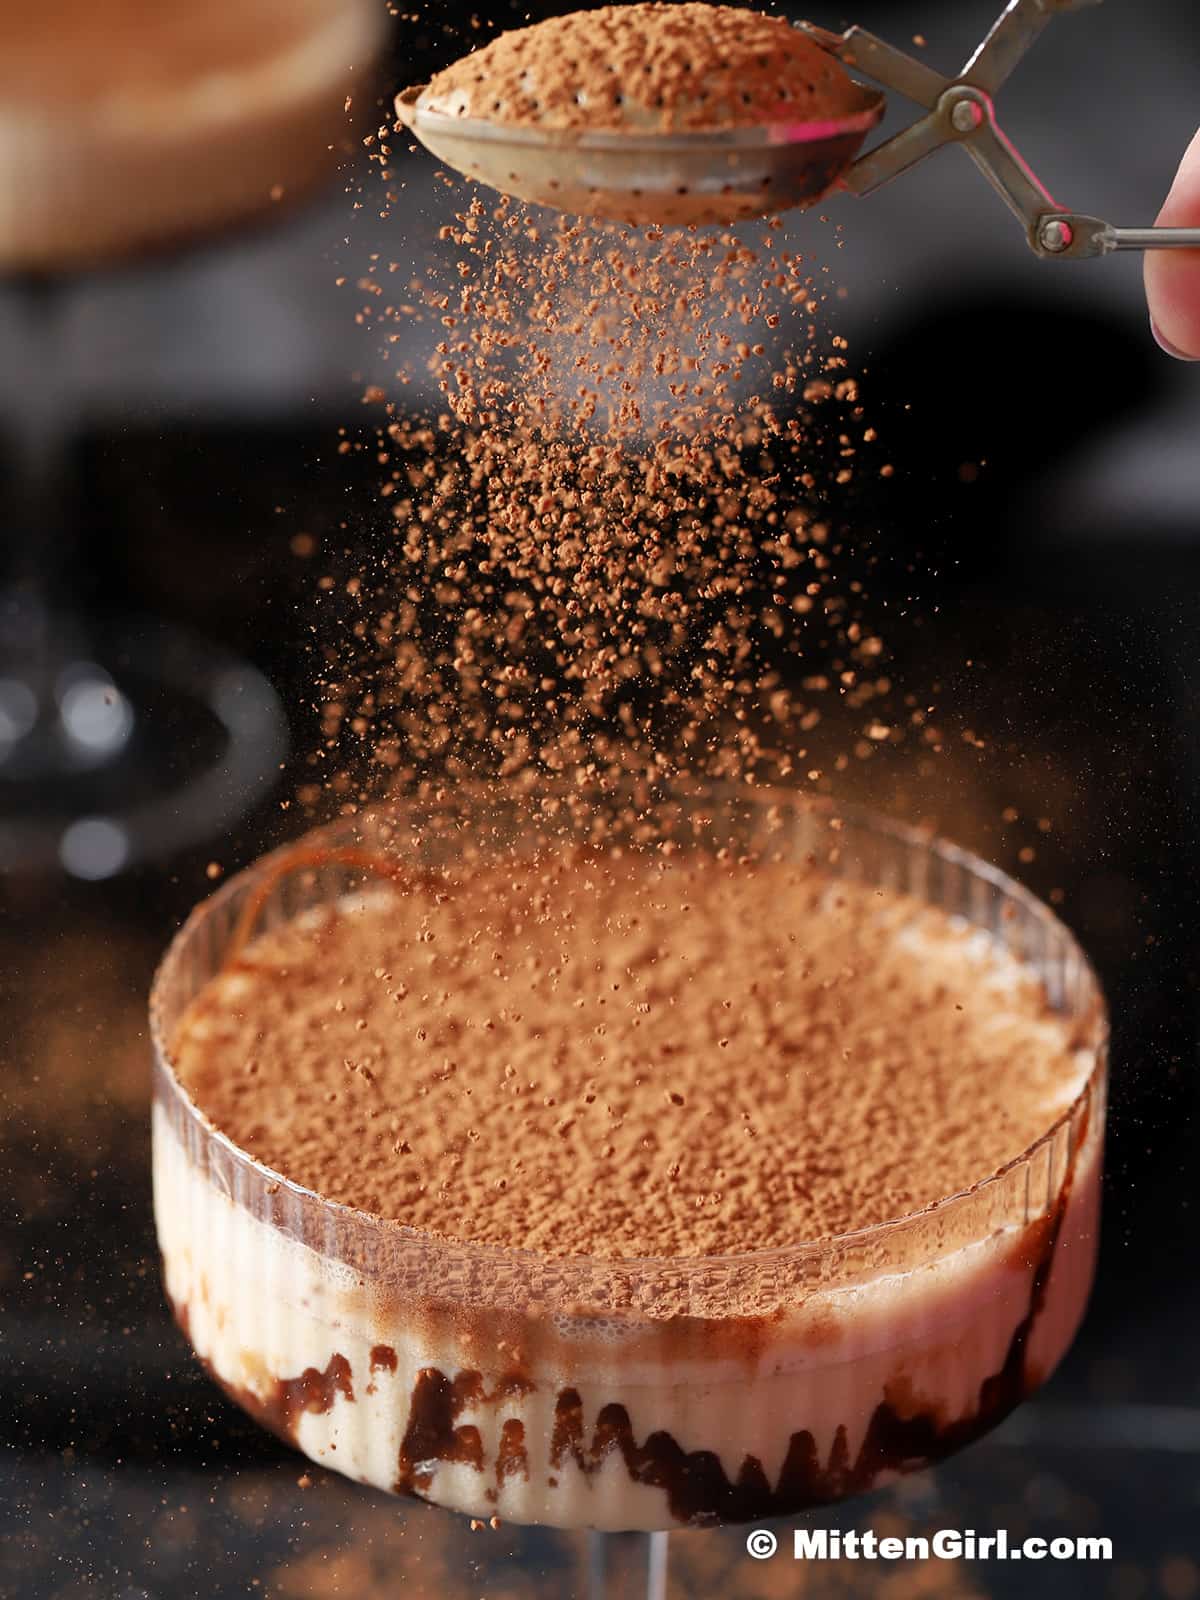 An excessive amount of cocoa powder being dusted onto a cocktail.